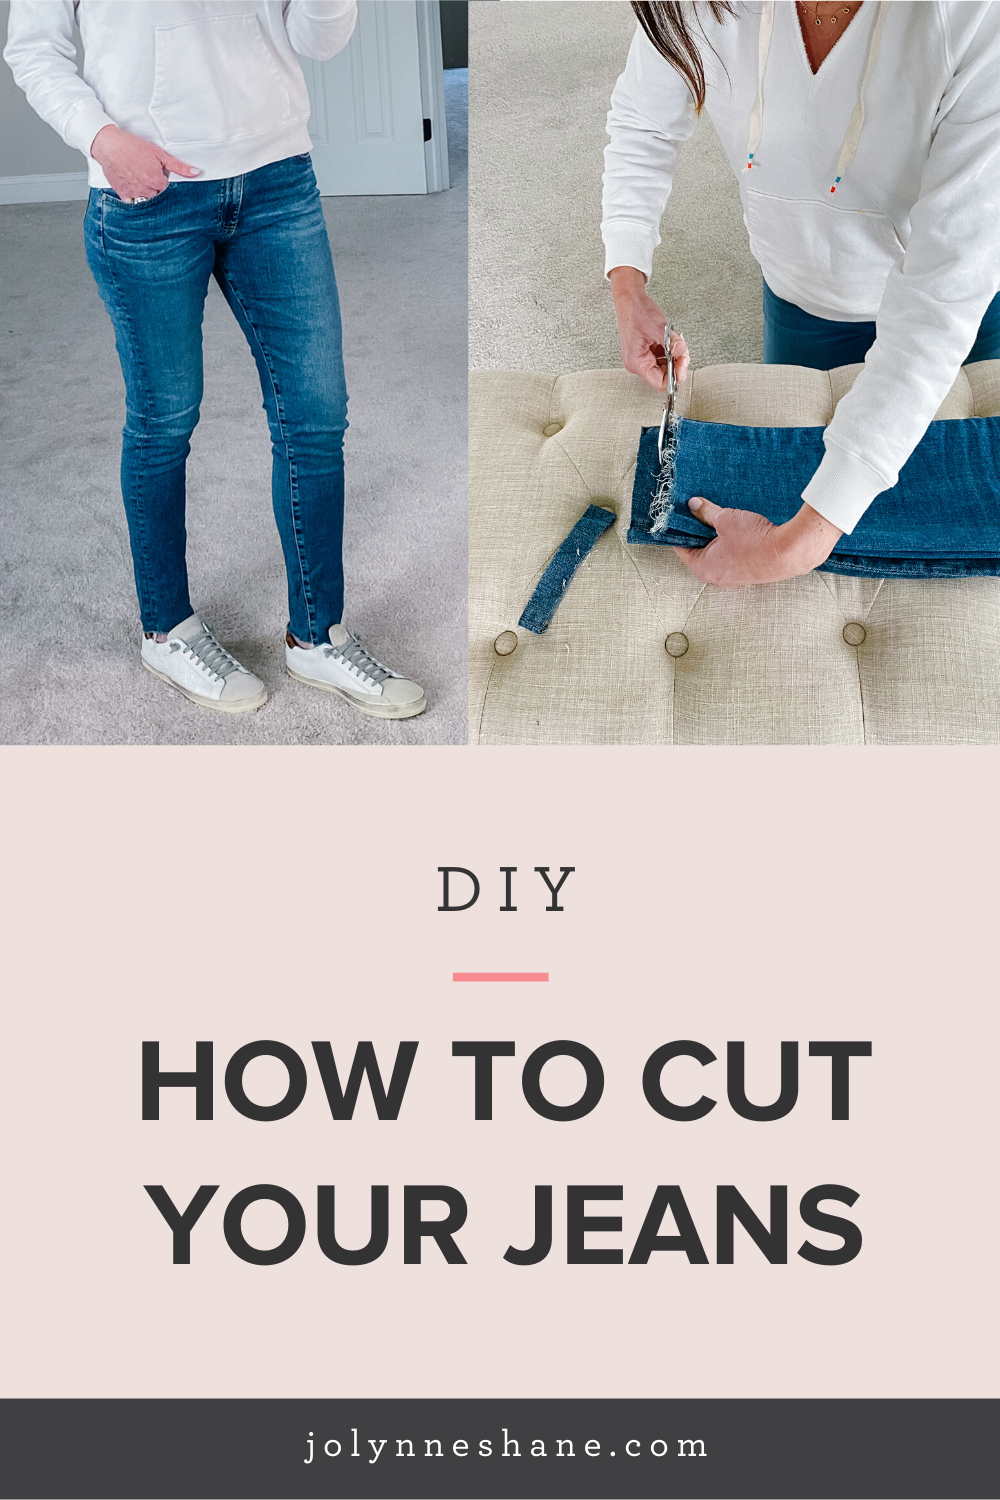 How To Cut Your Jeans for DIY Raw Hem